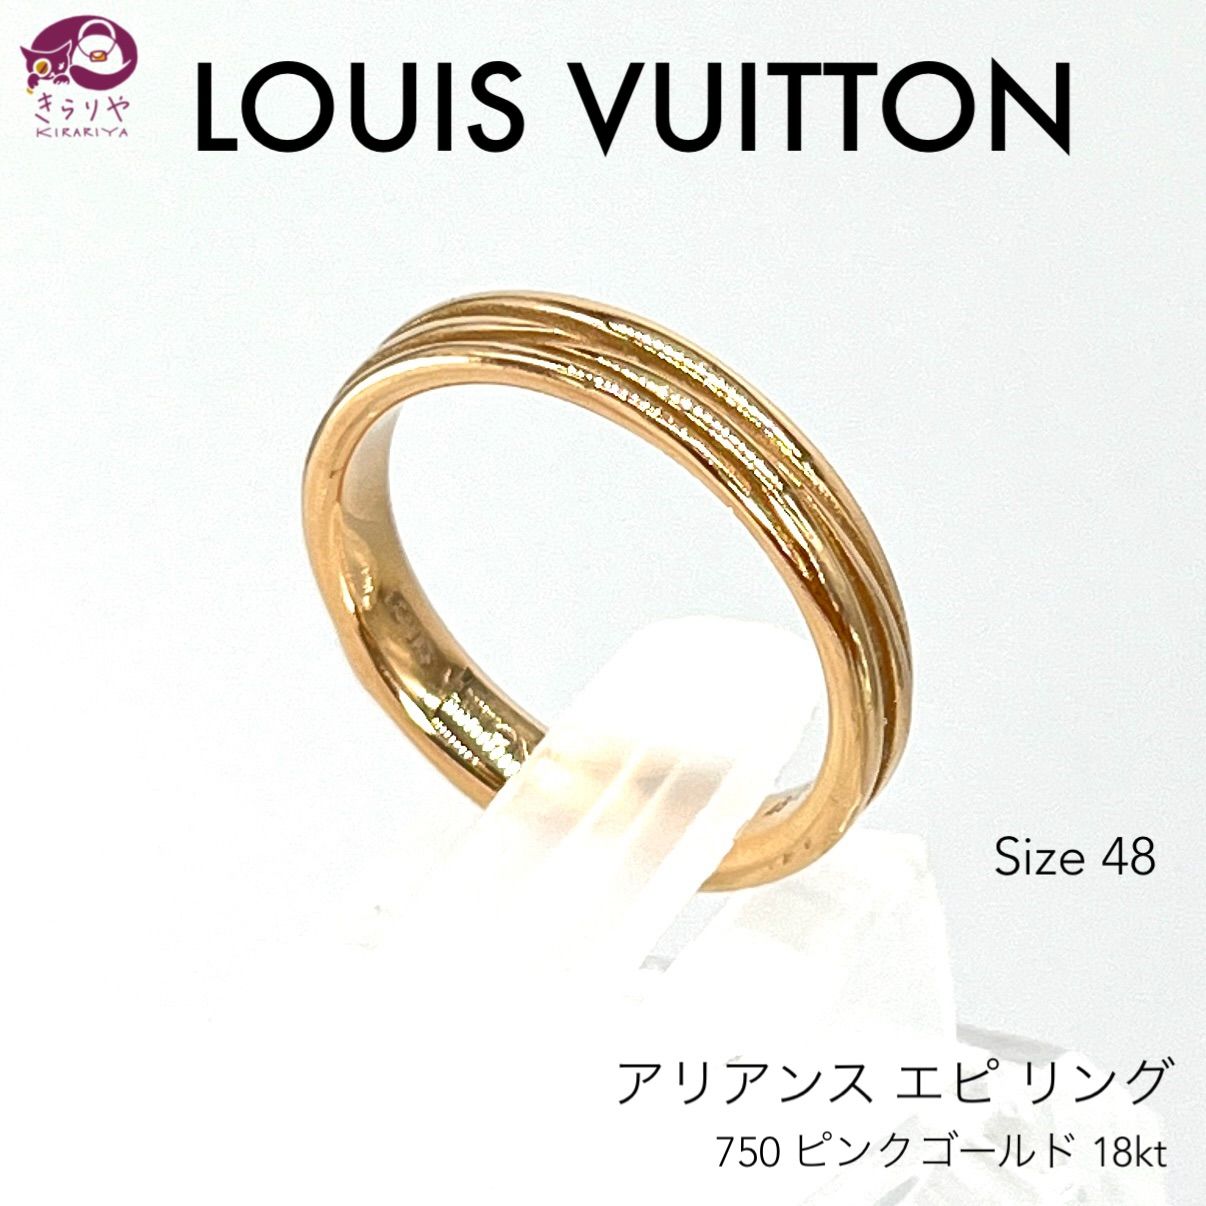 LOUIS VUITTON ルイヴィトン アリアンス エピ リング K18PG 750 ピンク ...